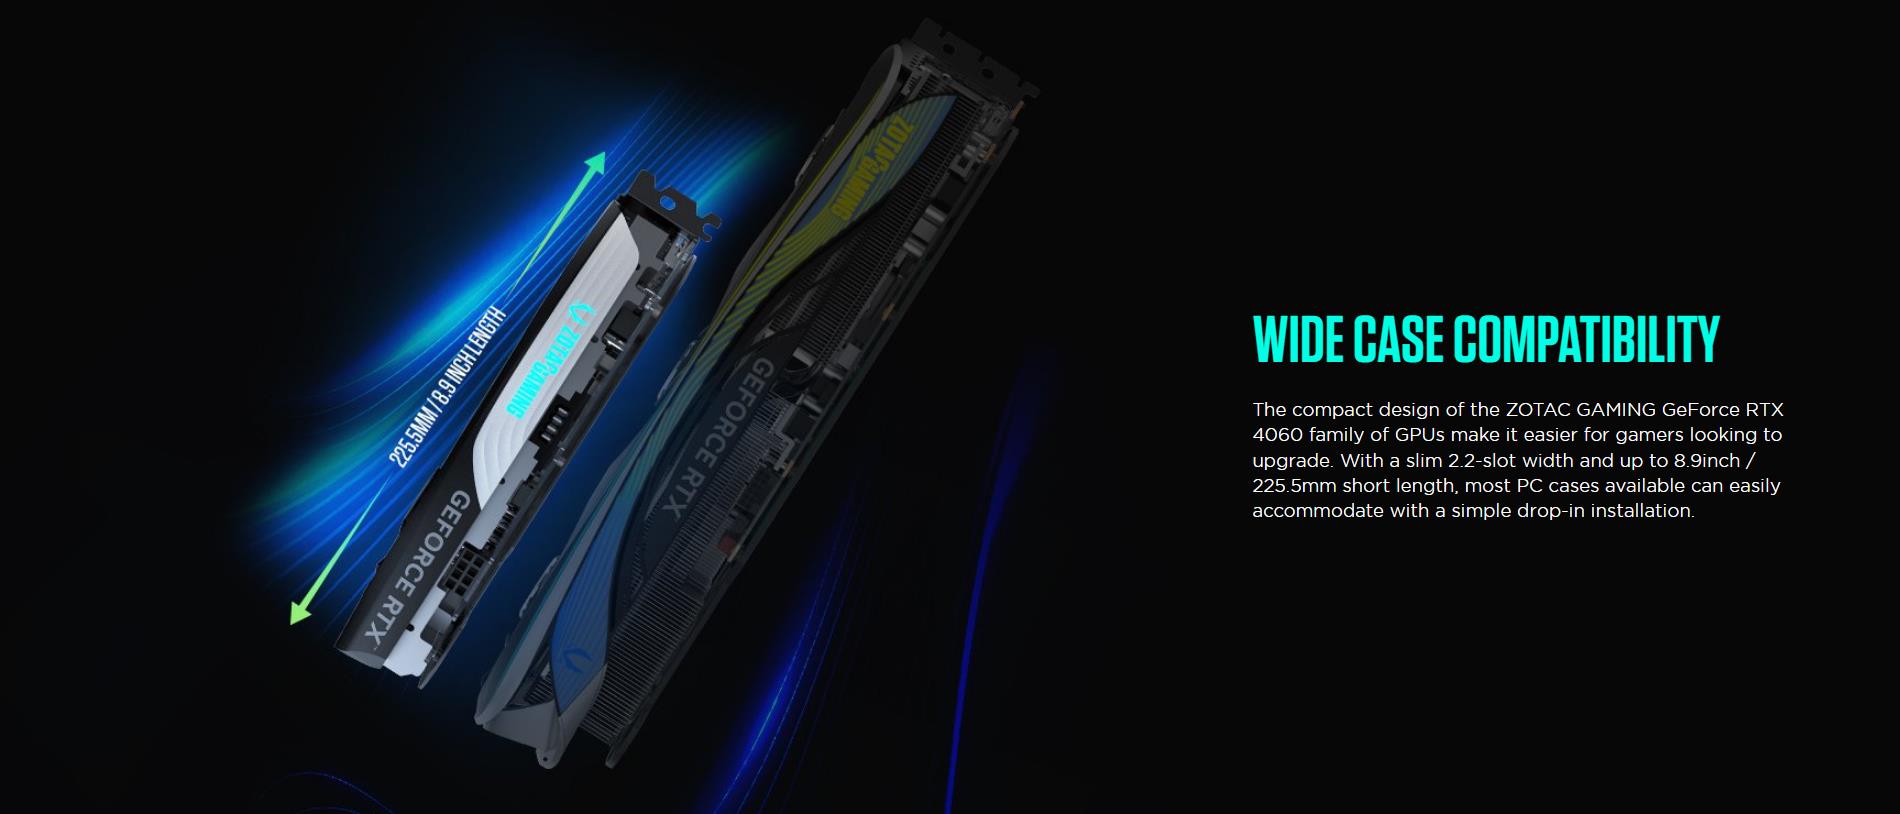 A large marketing image providing additional information about the product ZOTAC GAMING GeForce RTX 4060 SOLO 8GB GDDR6 - Additional alt info not provided